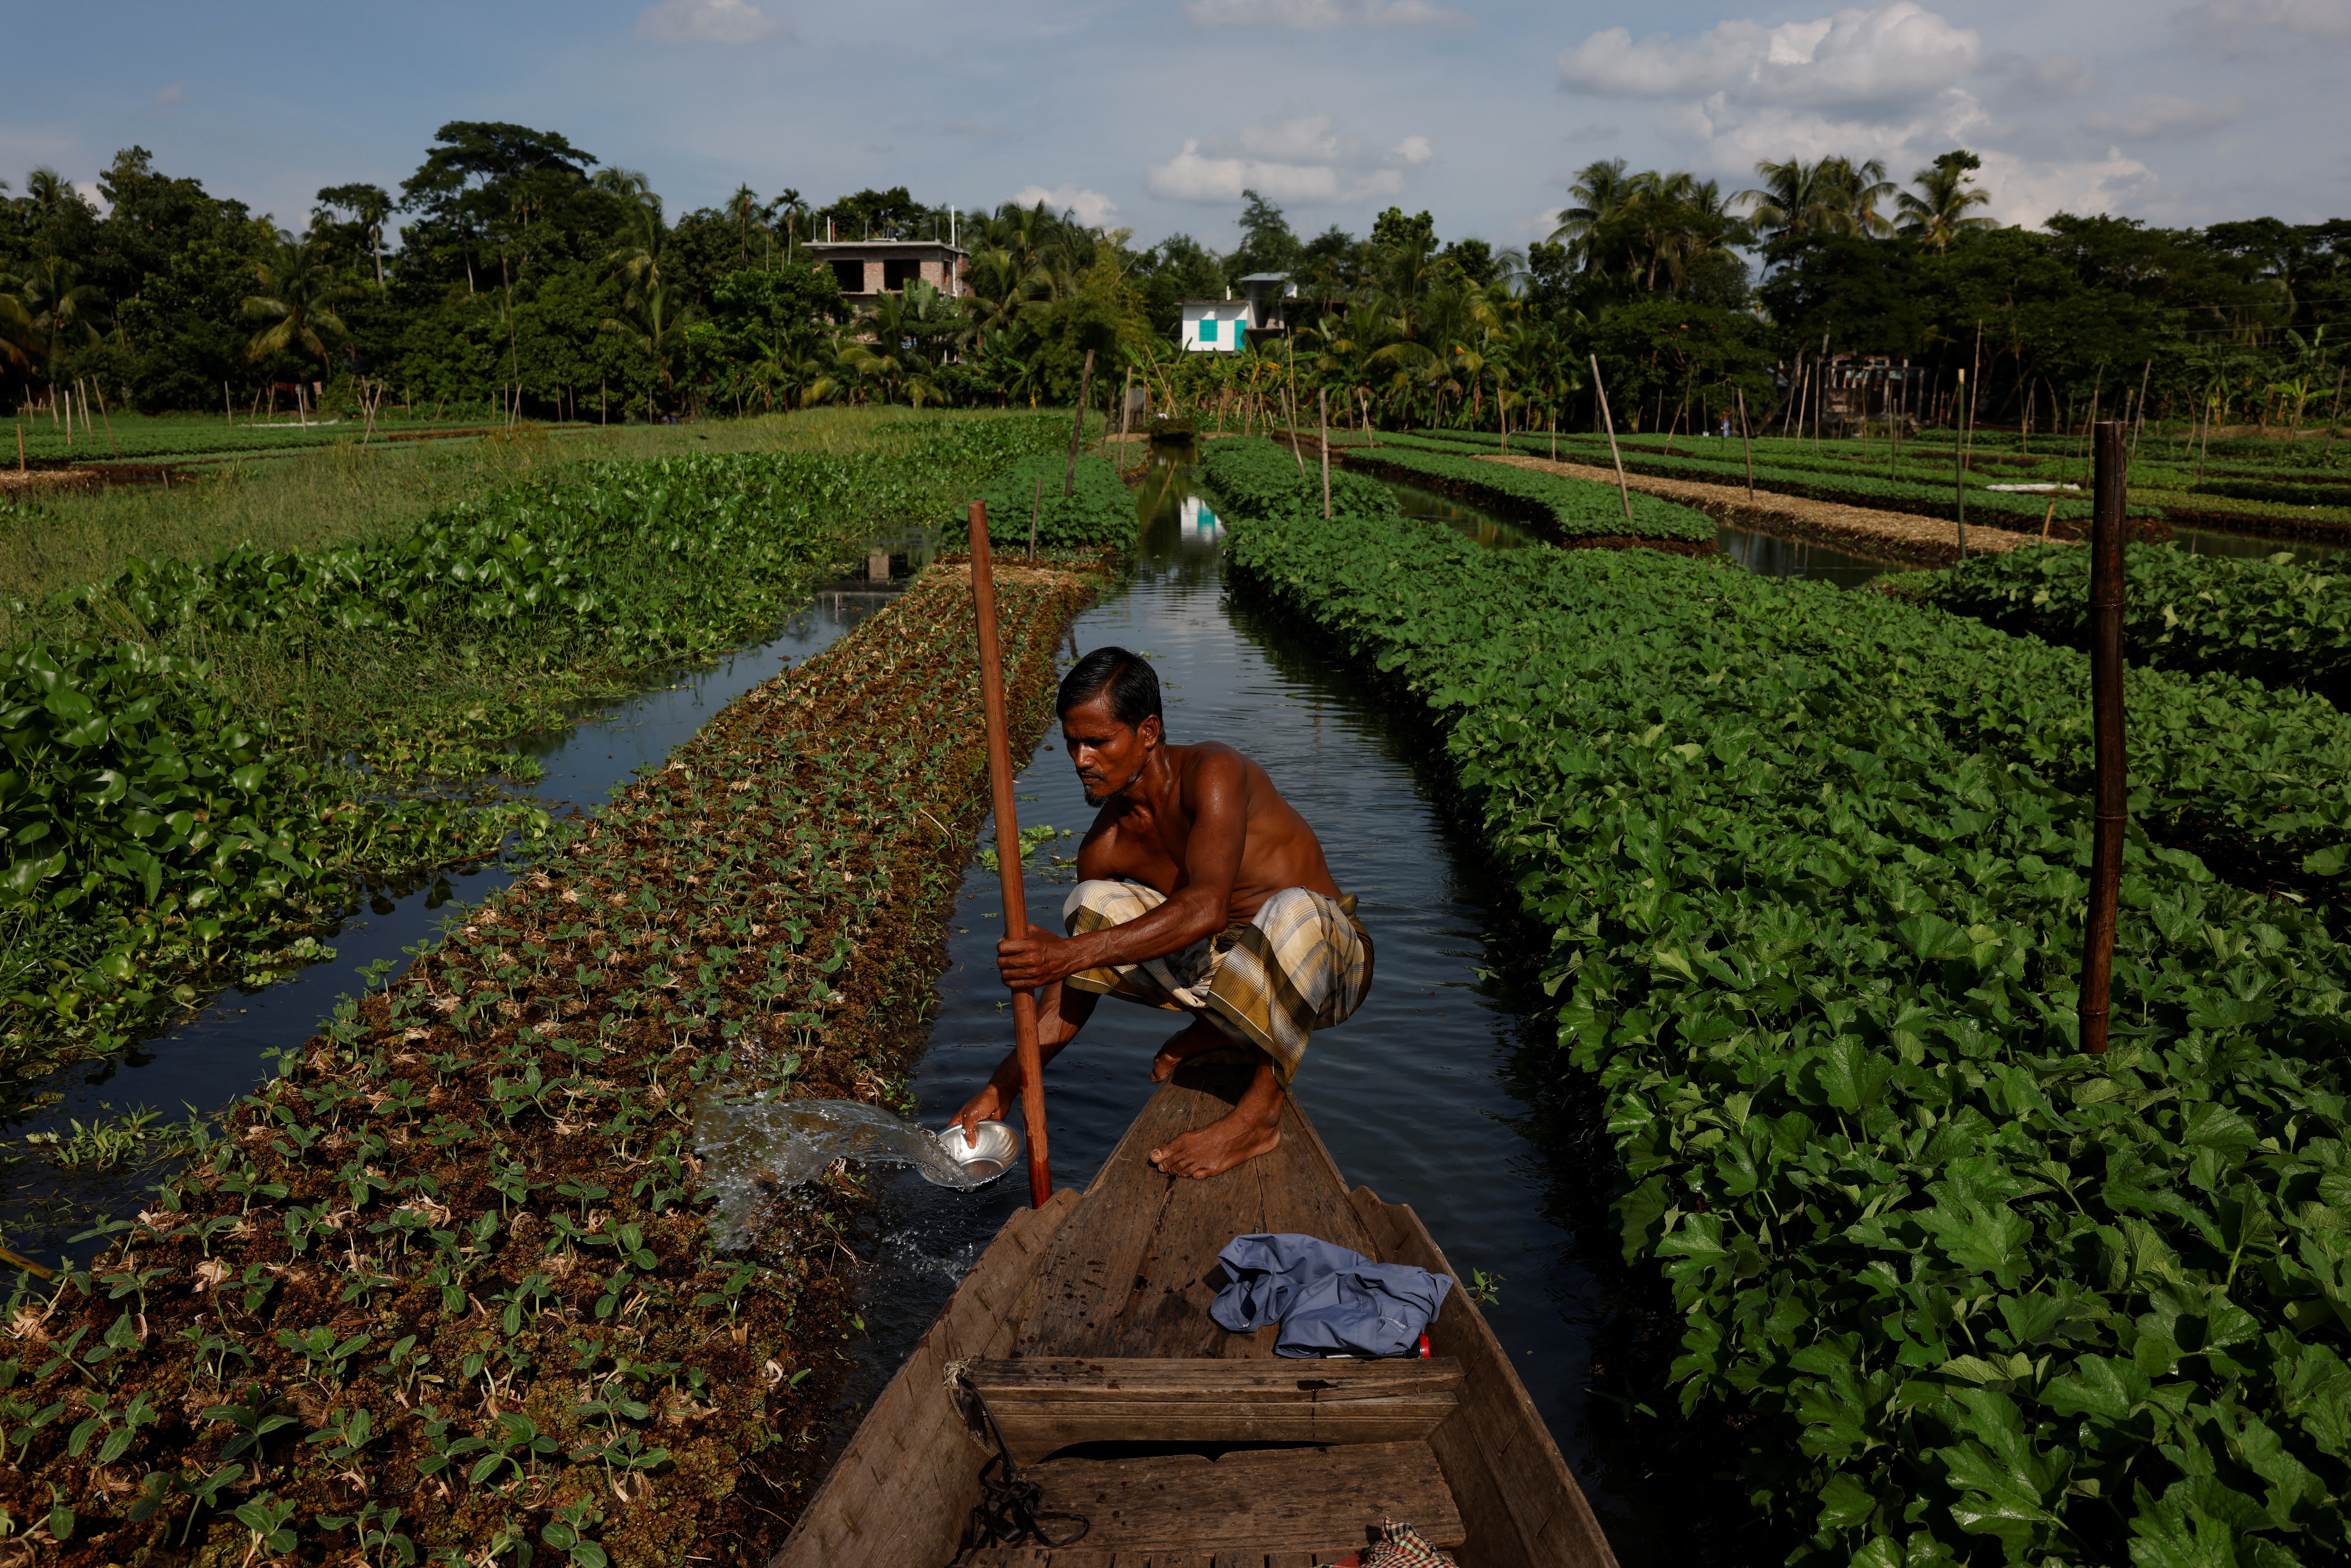 Mohammad Ibrahim, 48, irrigates his floating bed at his farm